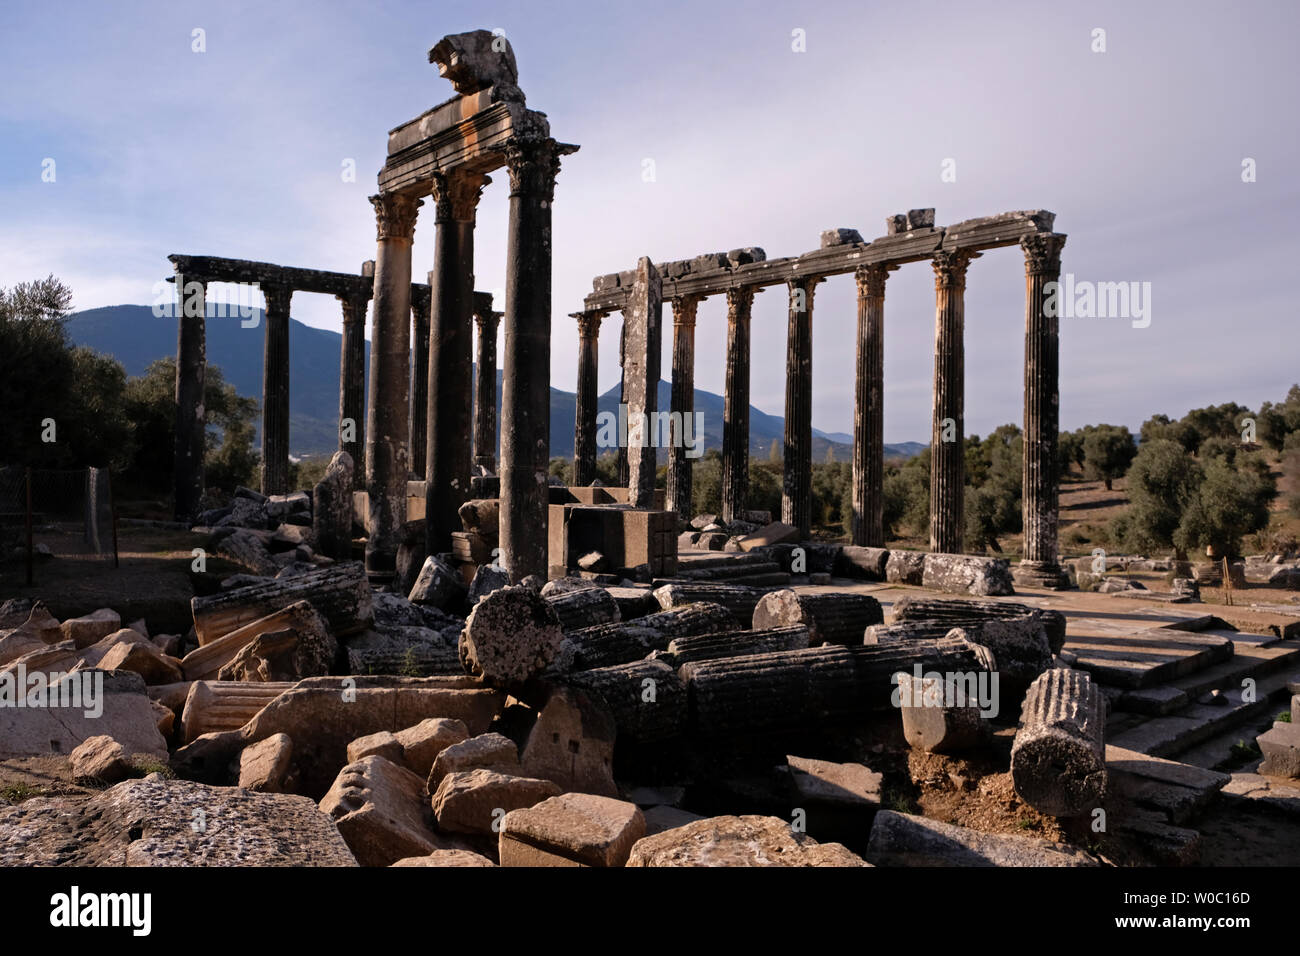 The ancient city of Euromos located in Mugla province in turkey is eyeing a spot in the UNESCO tentative list of World Heritage. Stock Photo